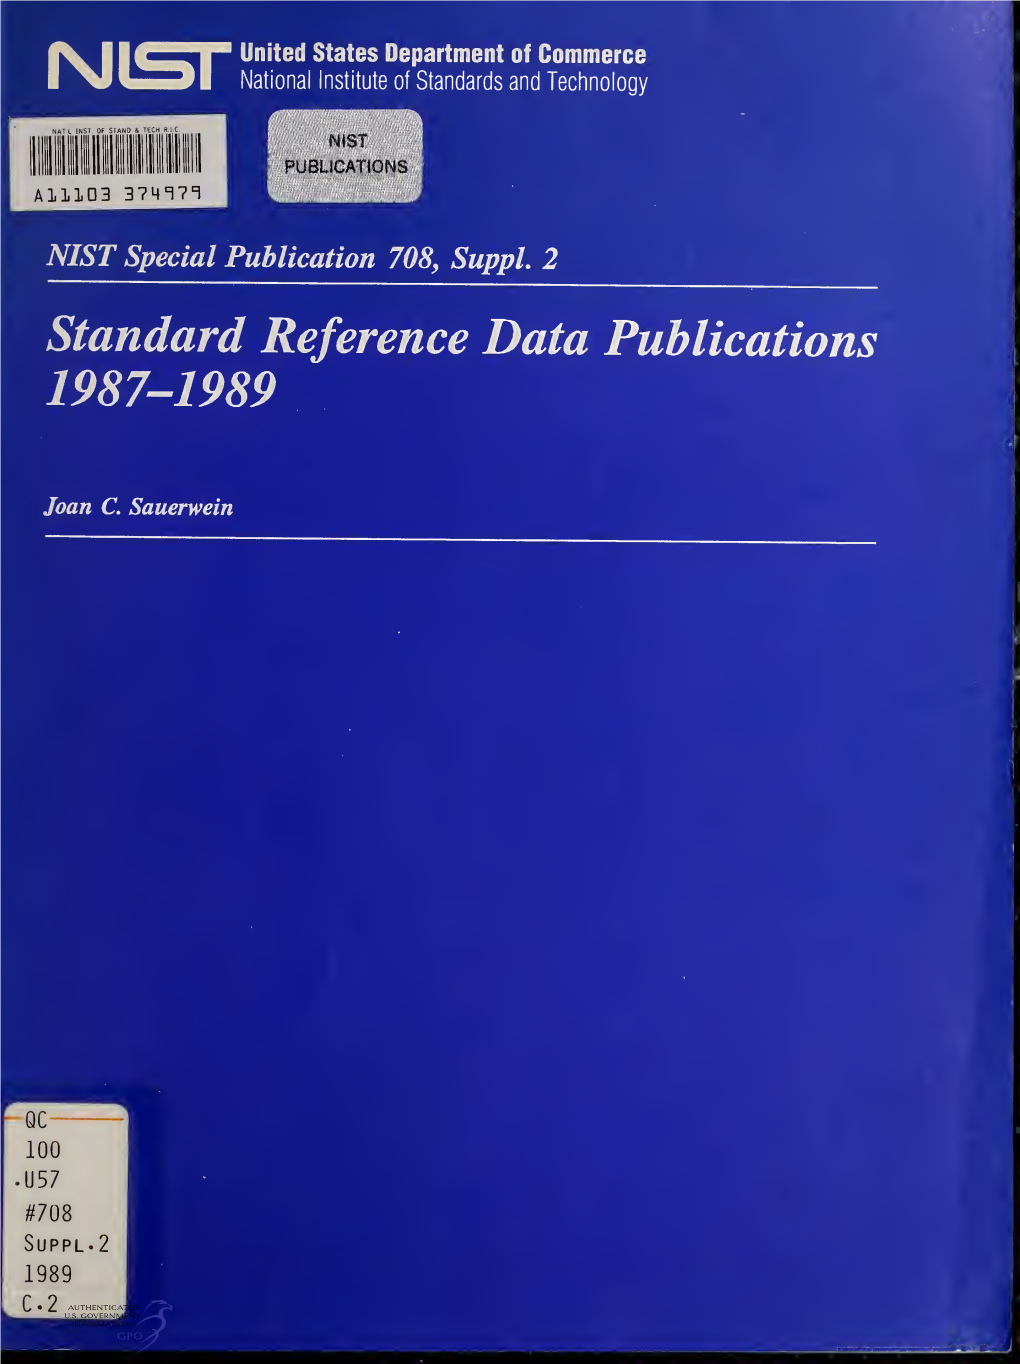 Standard Reference Data Publications 1987-1989